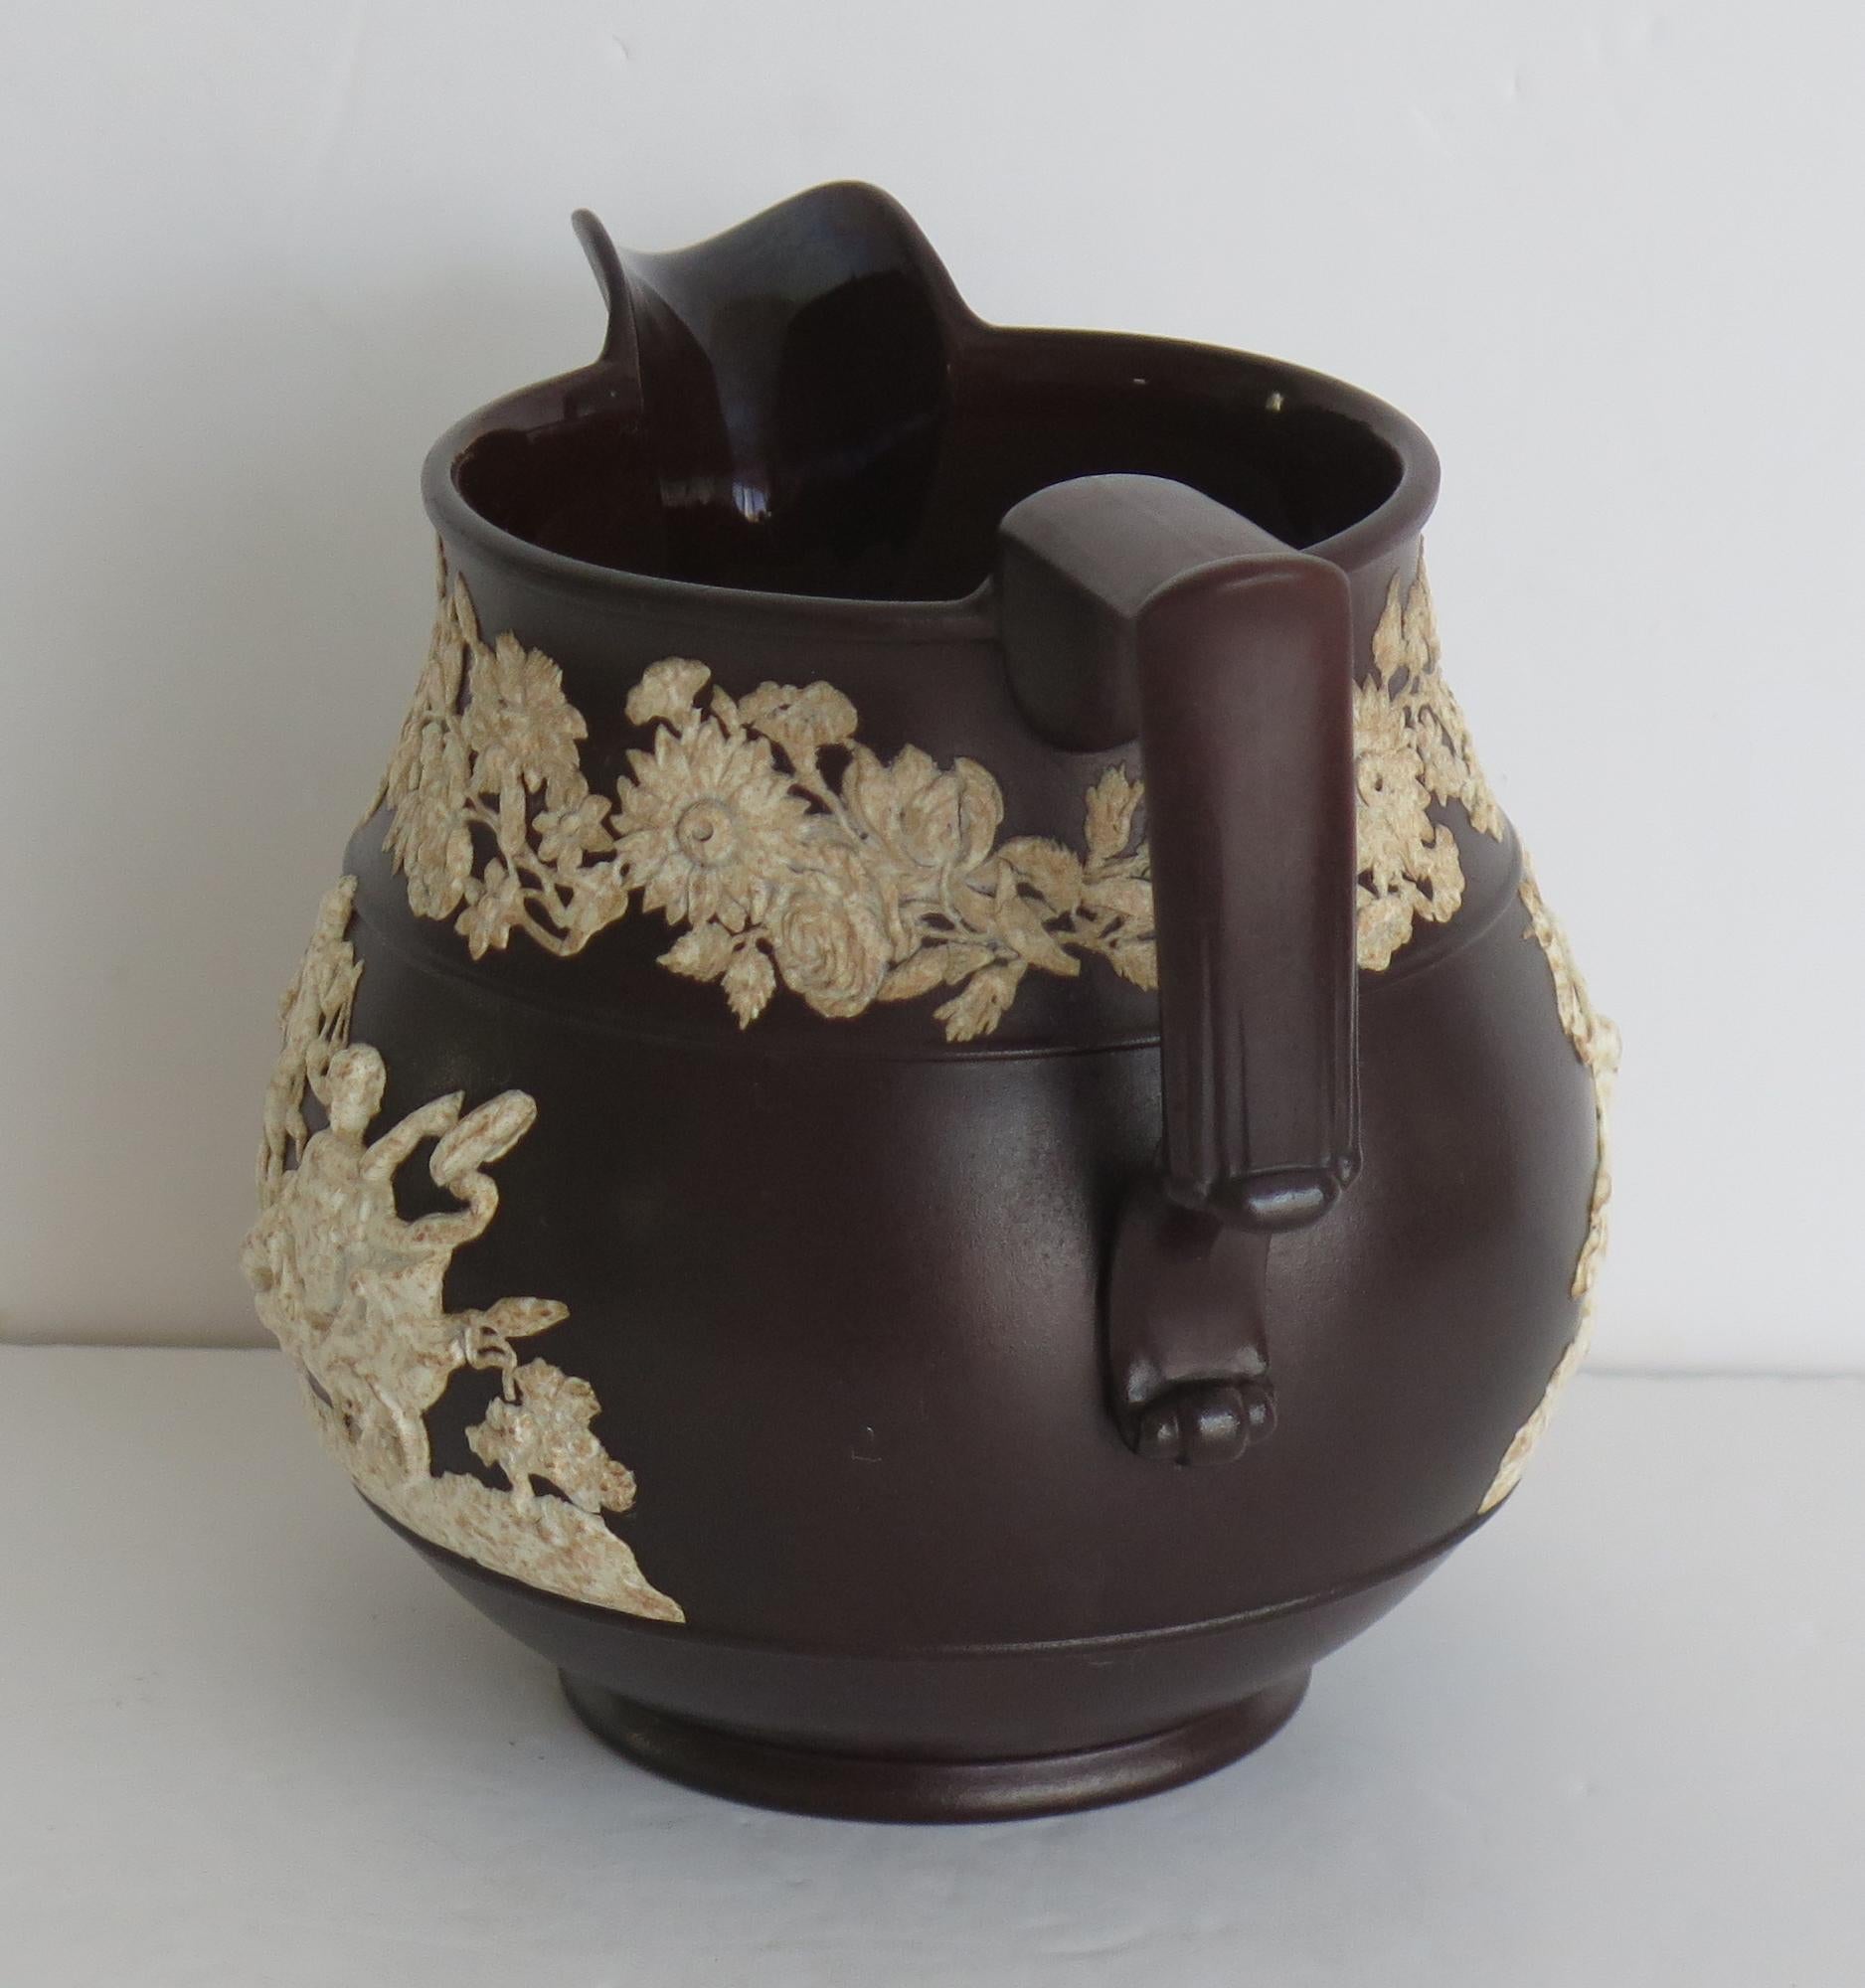 This is a rare antique earthenware pottery jasperware jug or pitcher by David Wilson and Sons of Hanley, formerly Robert Wilson, dating to the very early 19th Century, late Georgian period, circa 1810. 

The jug has a dark brown glaze with applied